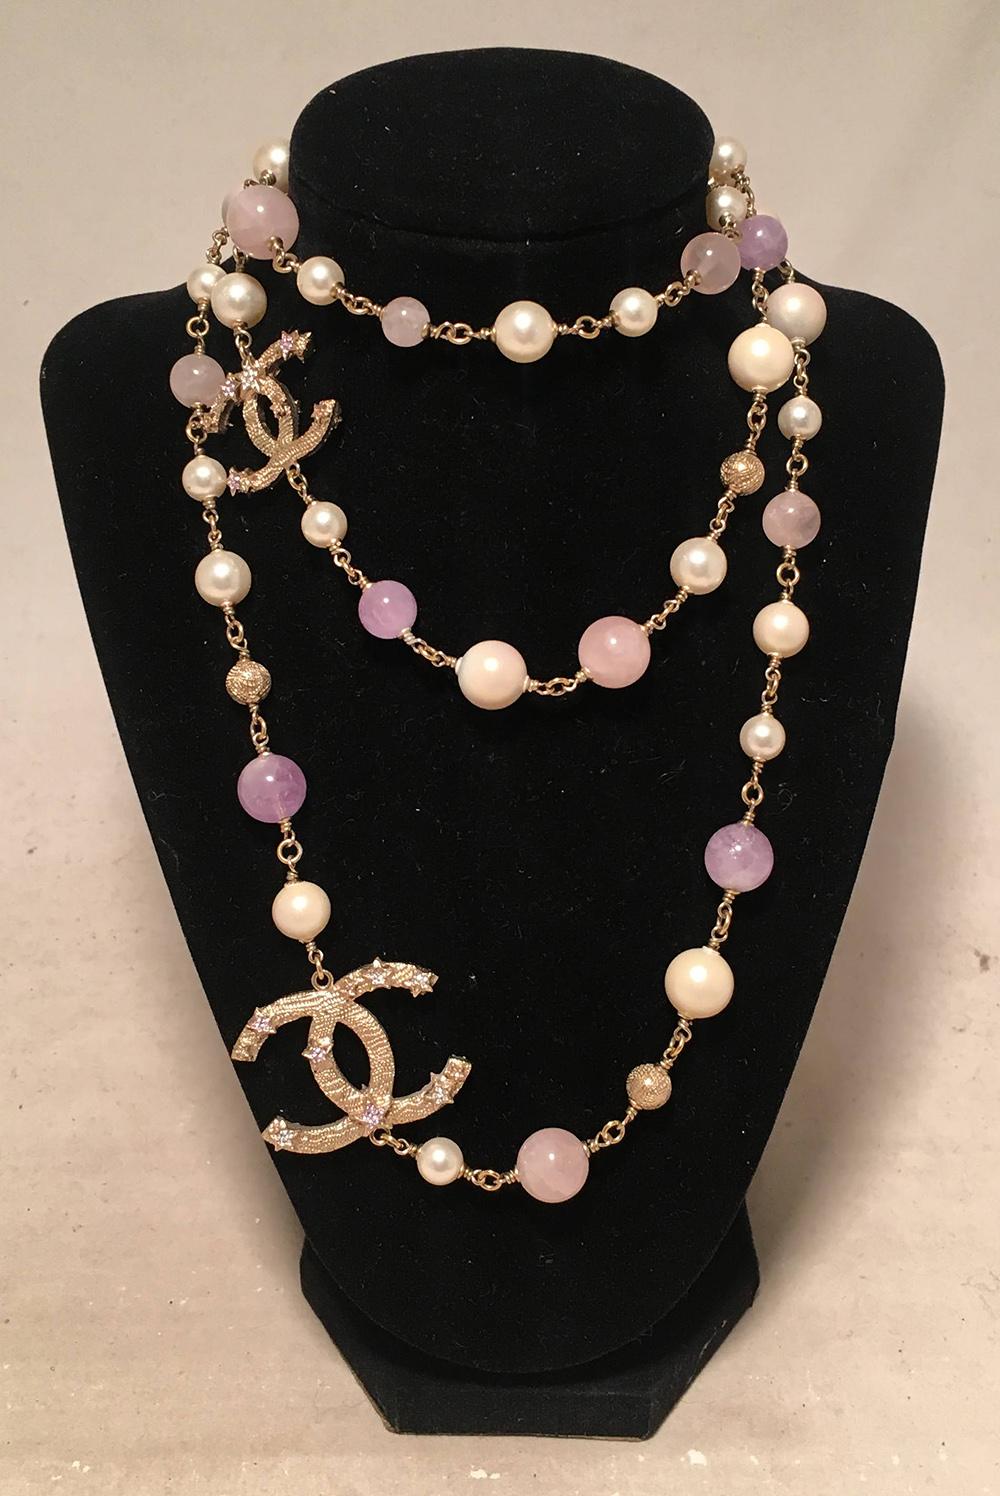 Chanel Amethyst Rose Quartz and Pearl Crystal CC Beaded Necklace in excellent condition. Cream pearls, pink rose quartz and purple amethyst beads strung together with gold chain hardware. 2 gold CC logo embellished charms feature delicate stars with